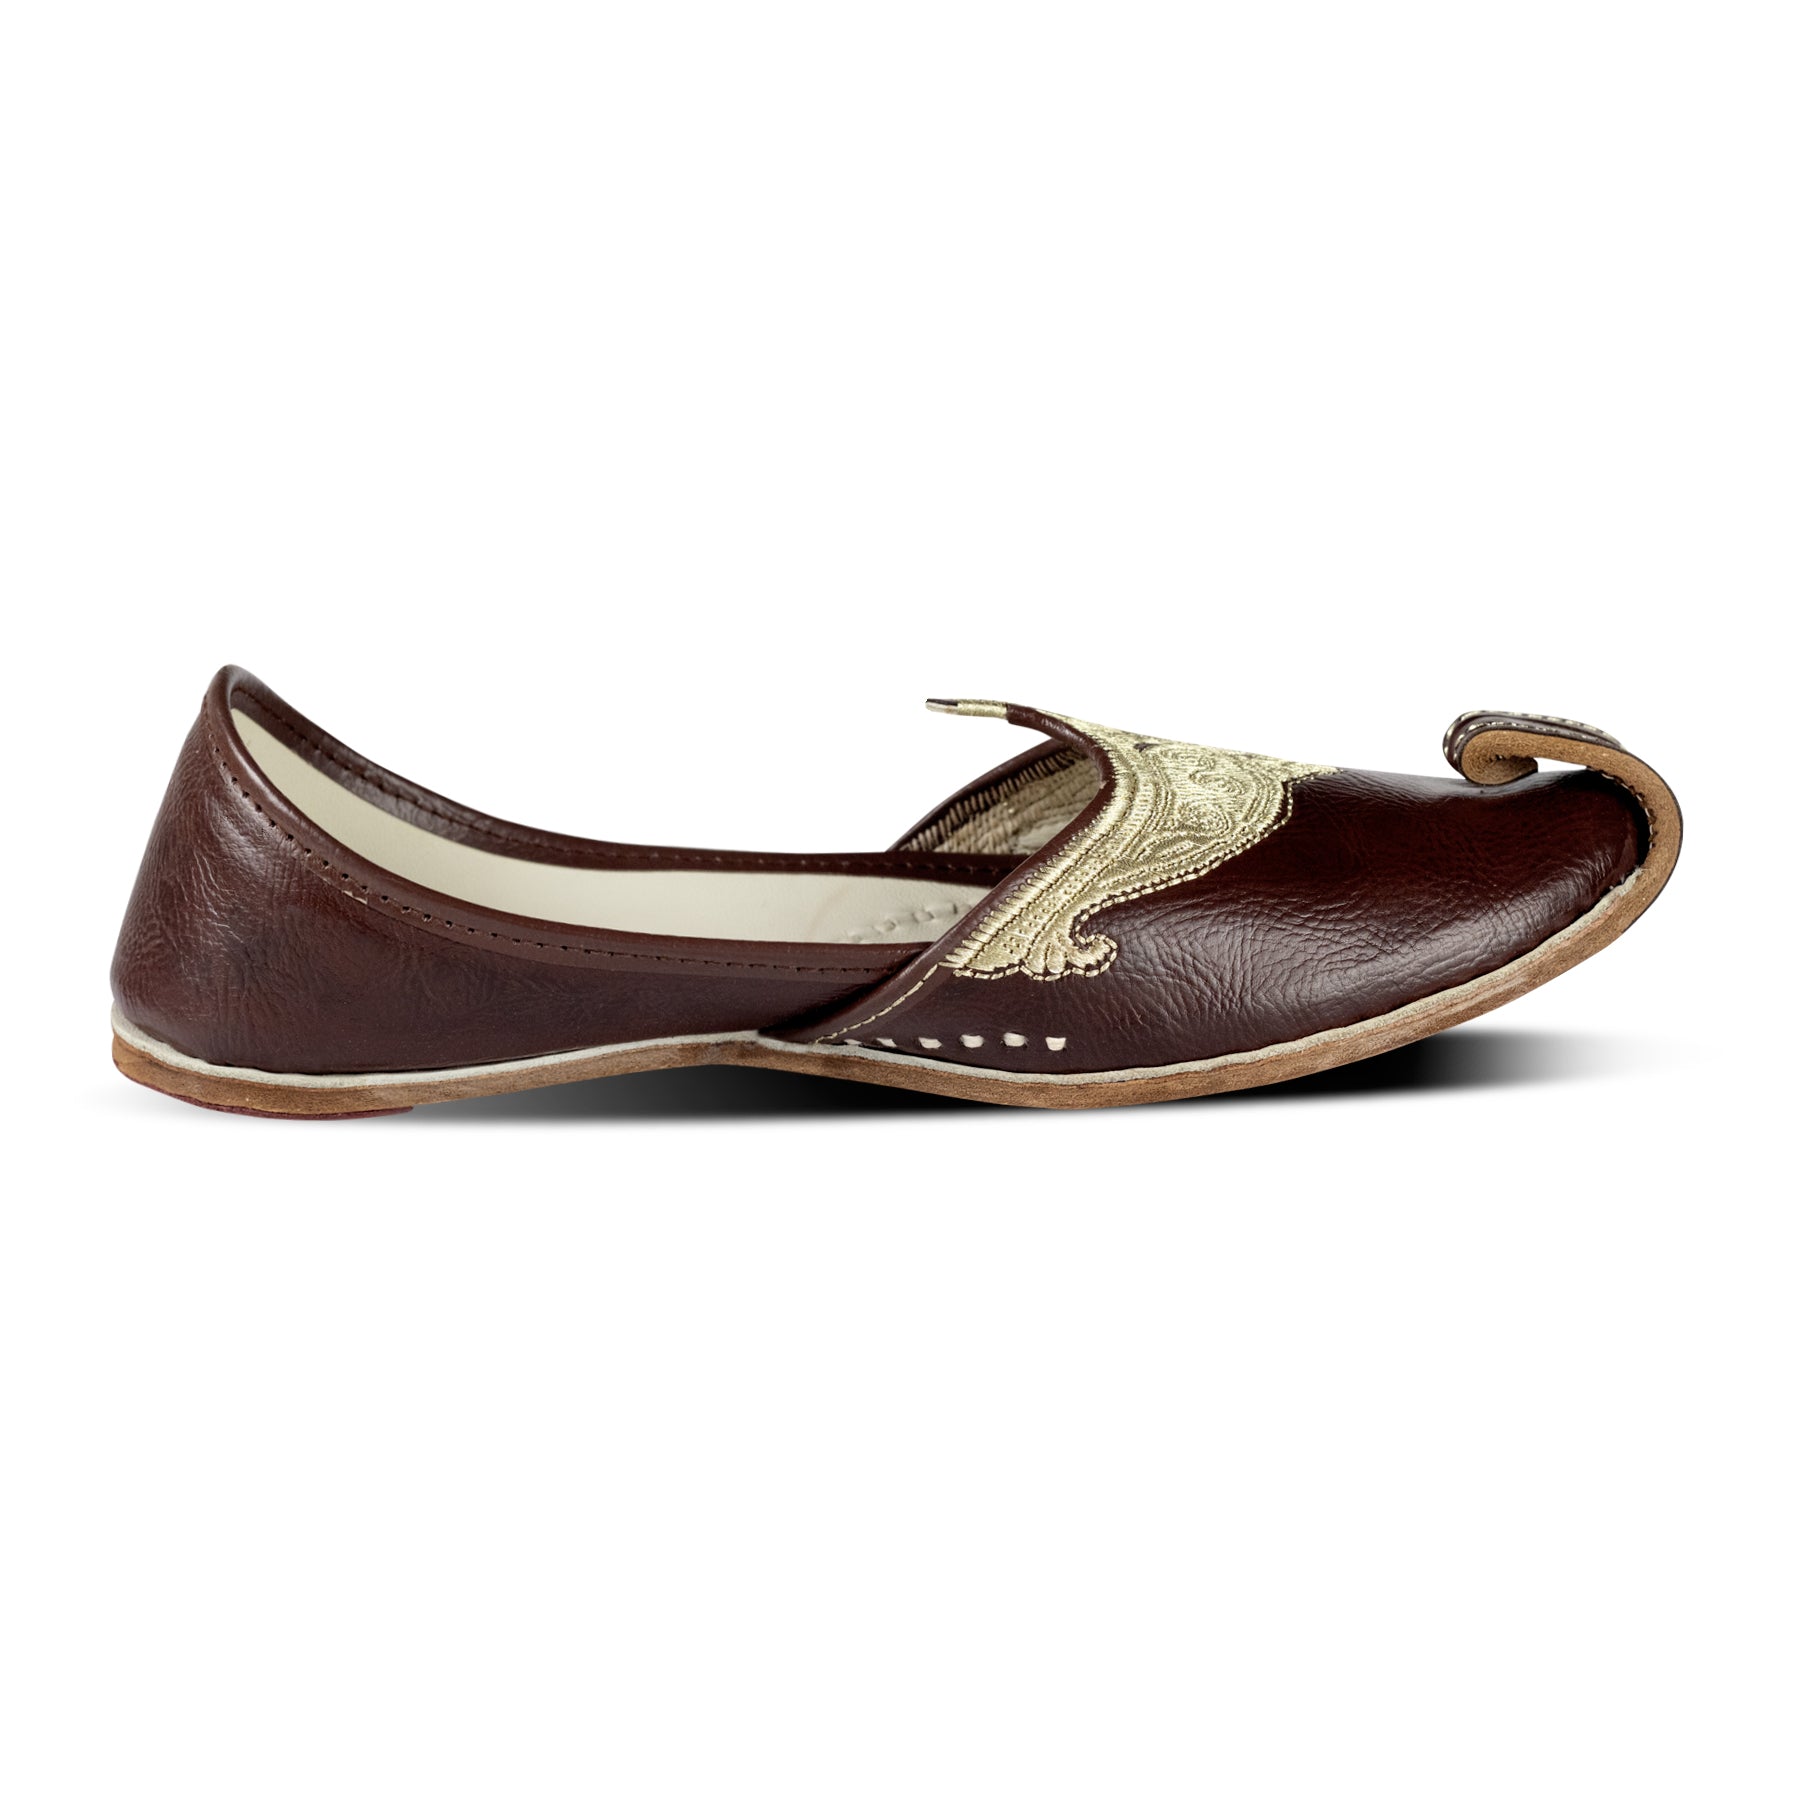 Brown Handcrafted Leather Jutti